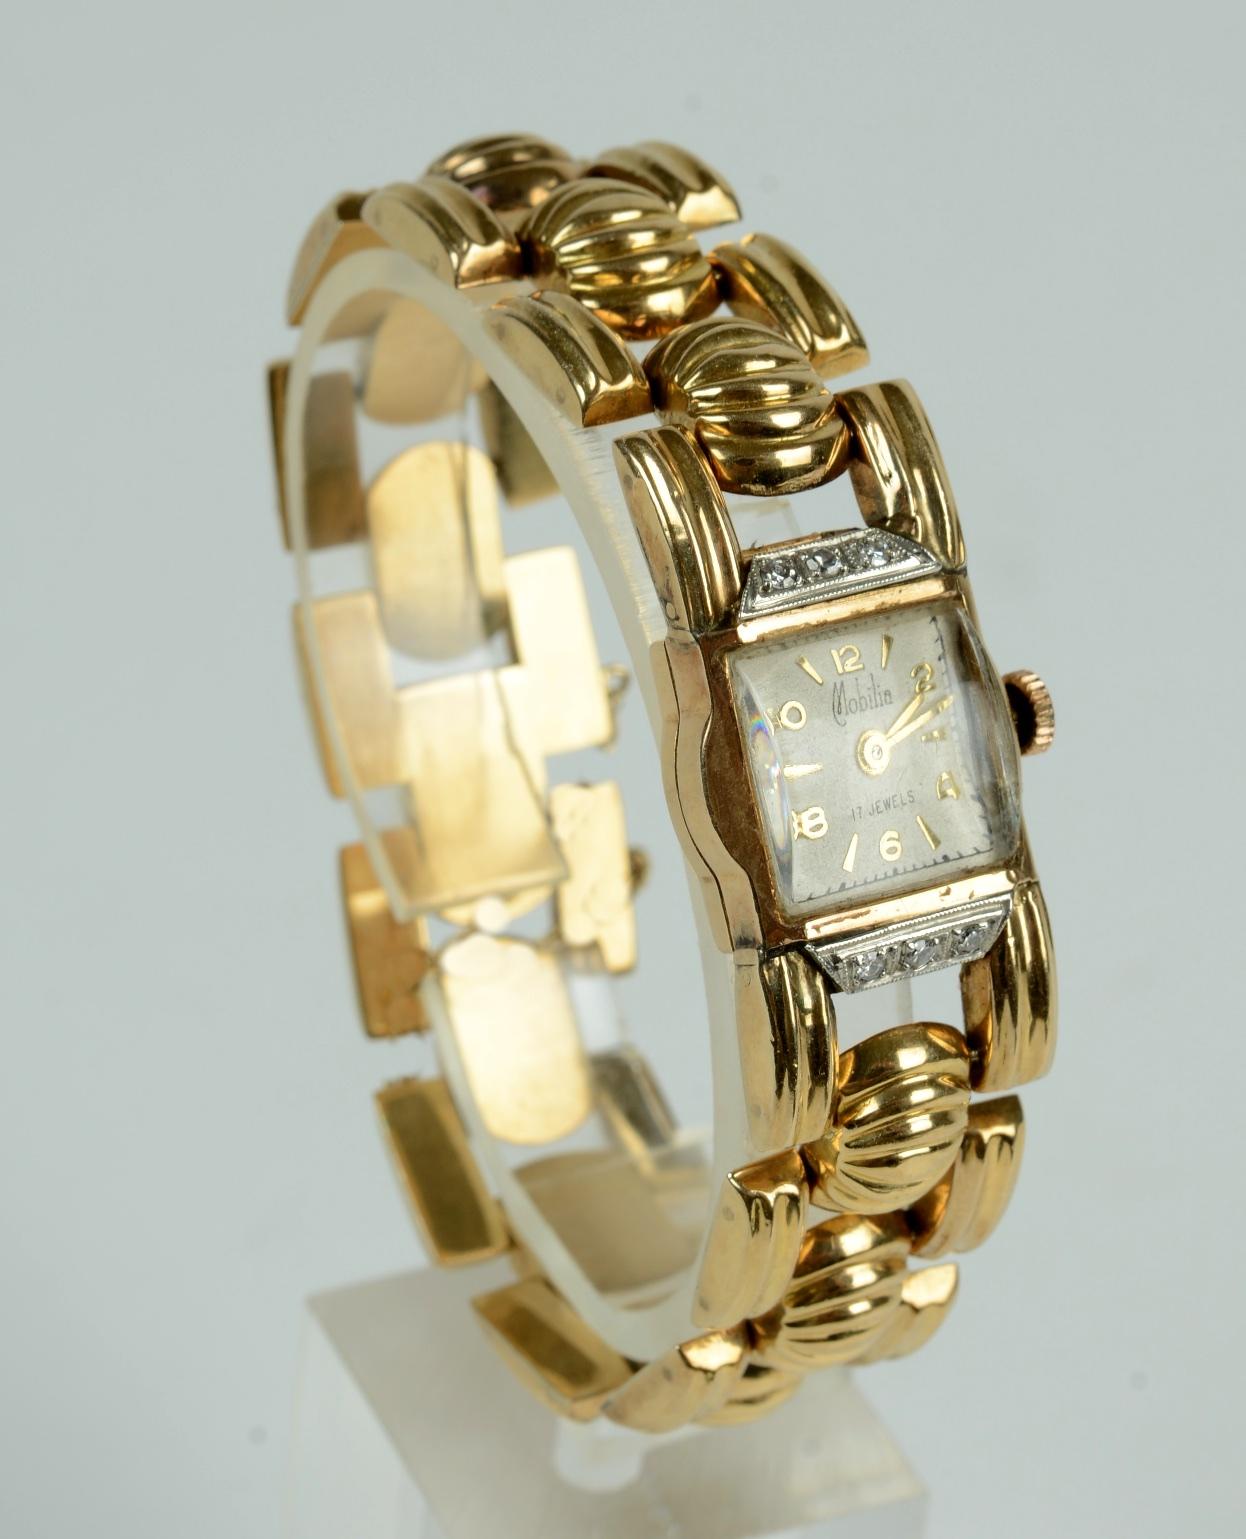 Ladies Retro 18k Yellow Gold and Diamond Bracelet Watch, c1940's. The bracelet consists of eleven ribbed, articulating lobed orbs with a hidden clasp and safety chain. The modified tourneau shaped face is signed 